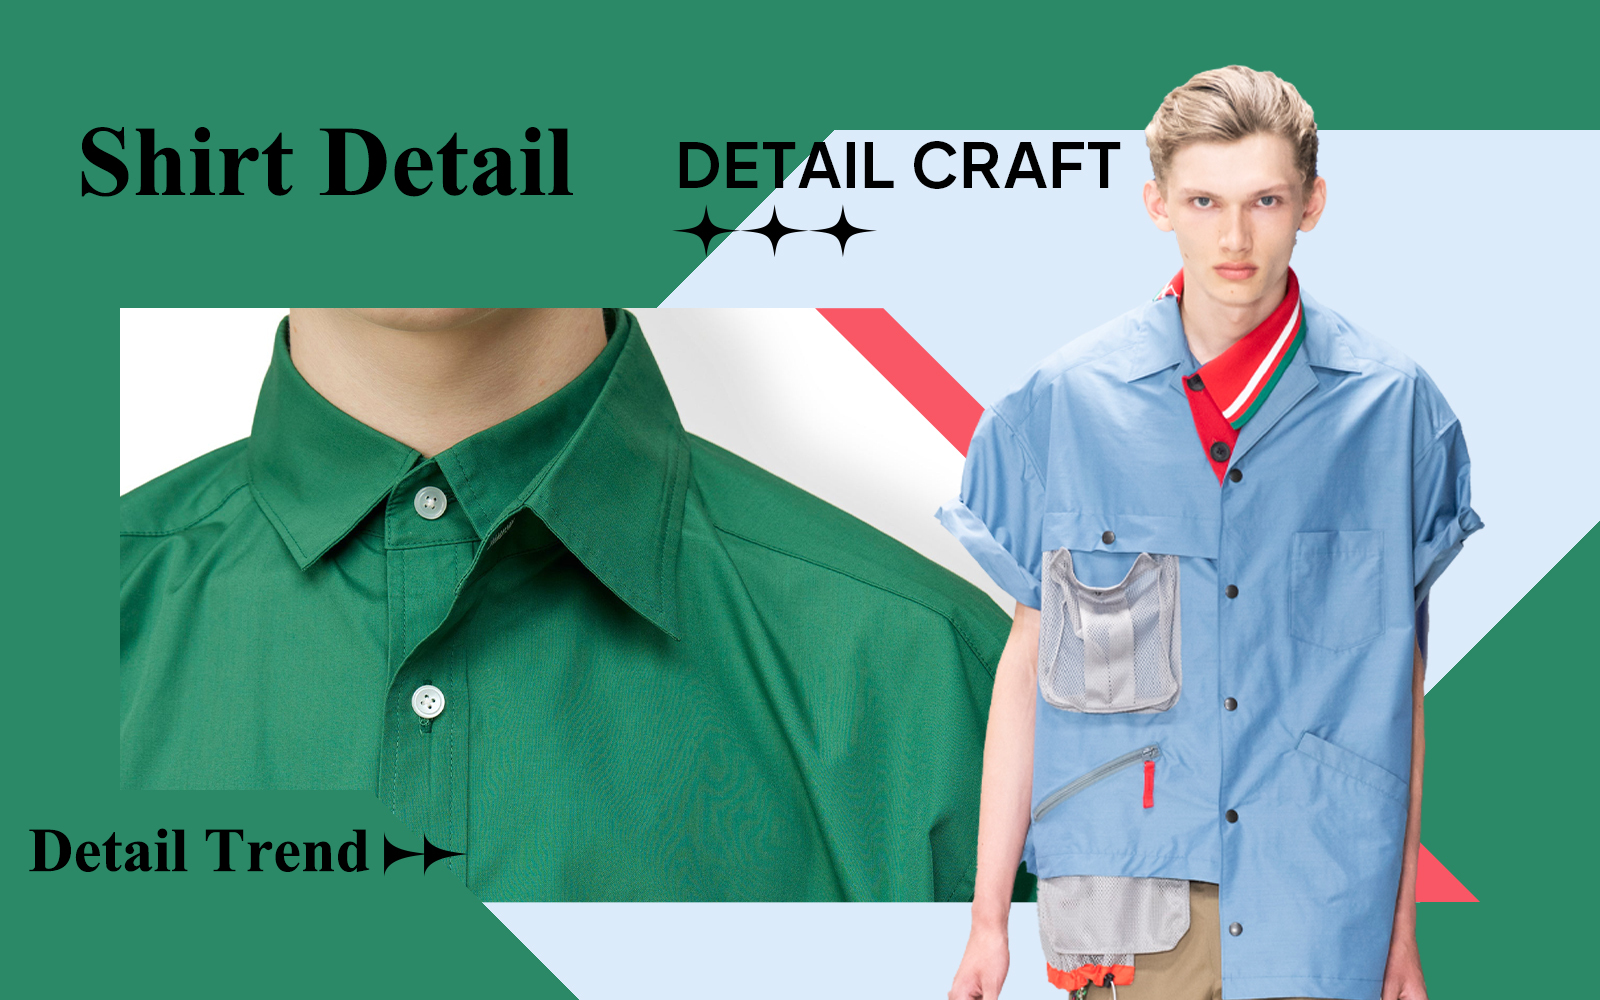 Fashion Commuting -- The Detail & Craft Trend for Men's Shirt